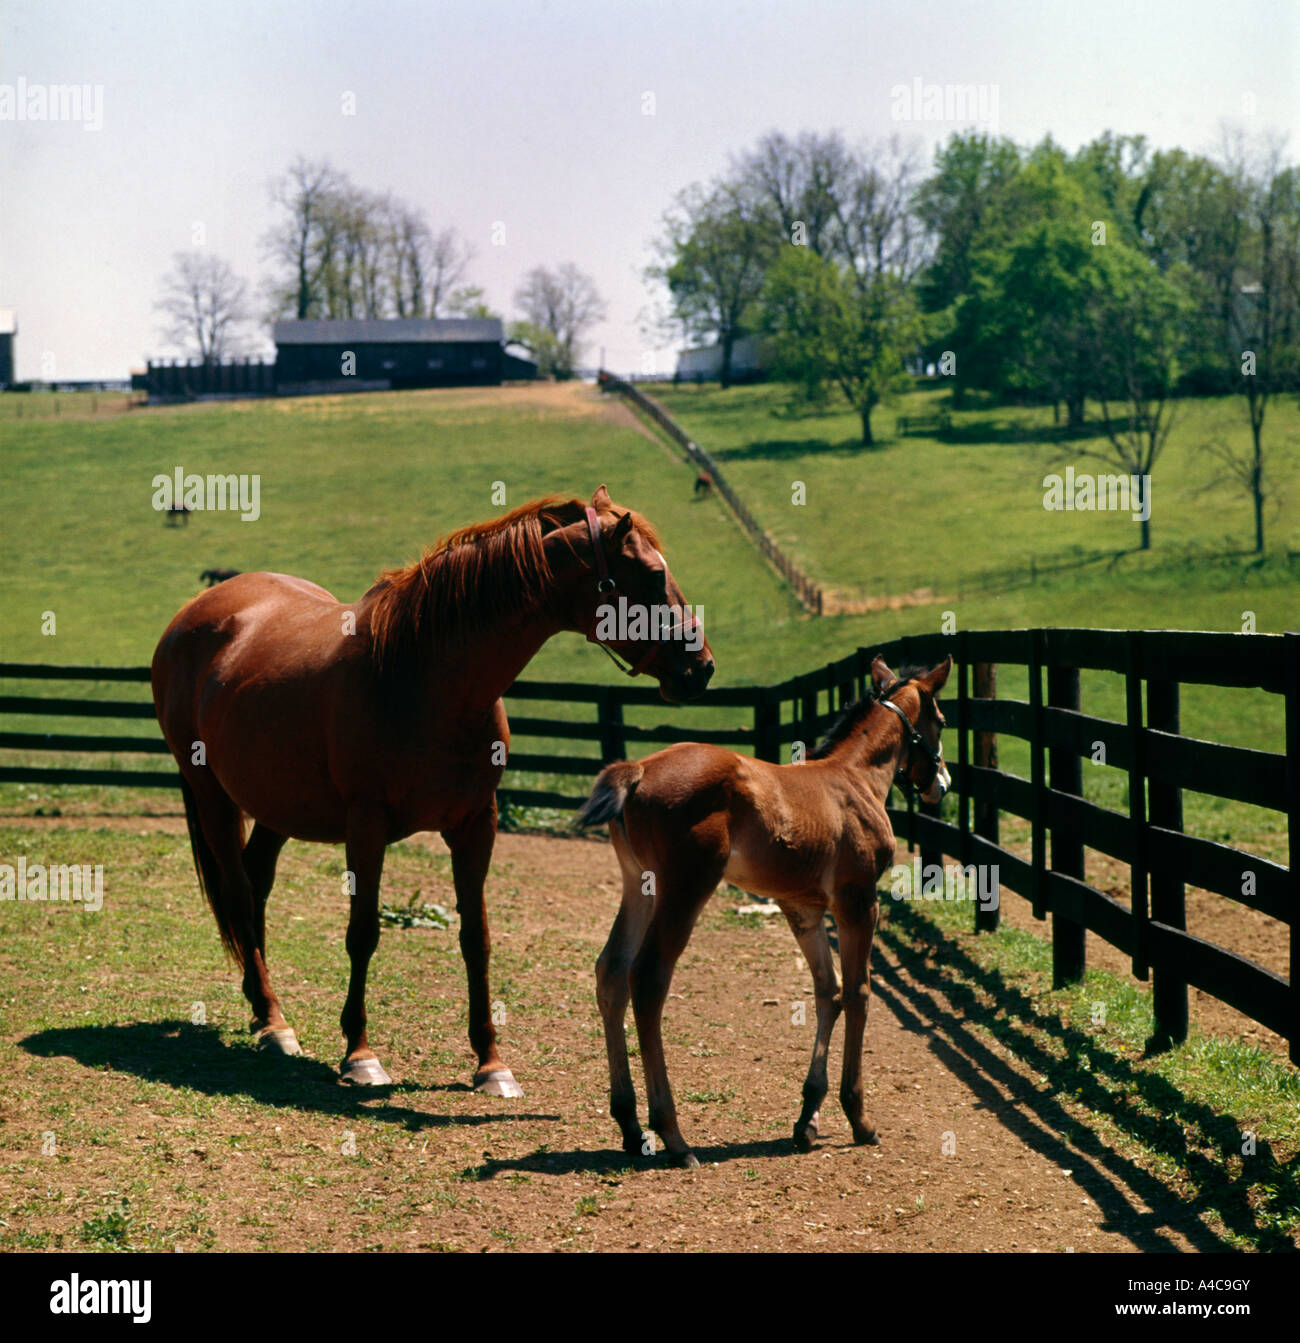 Thoroughbred racing horses are produced on horse farms in the Blue Grass region of Kentucky Stock Photo